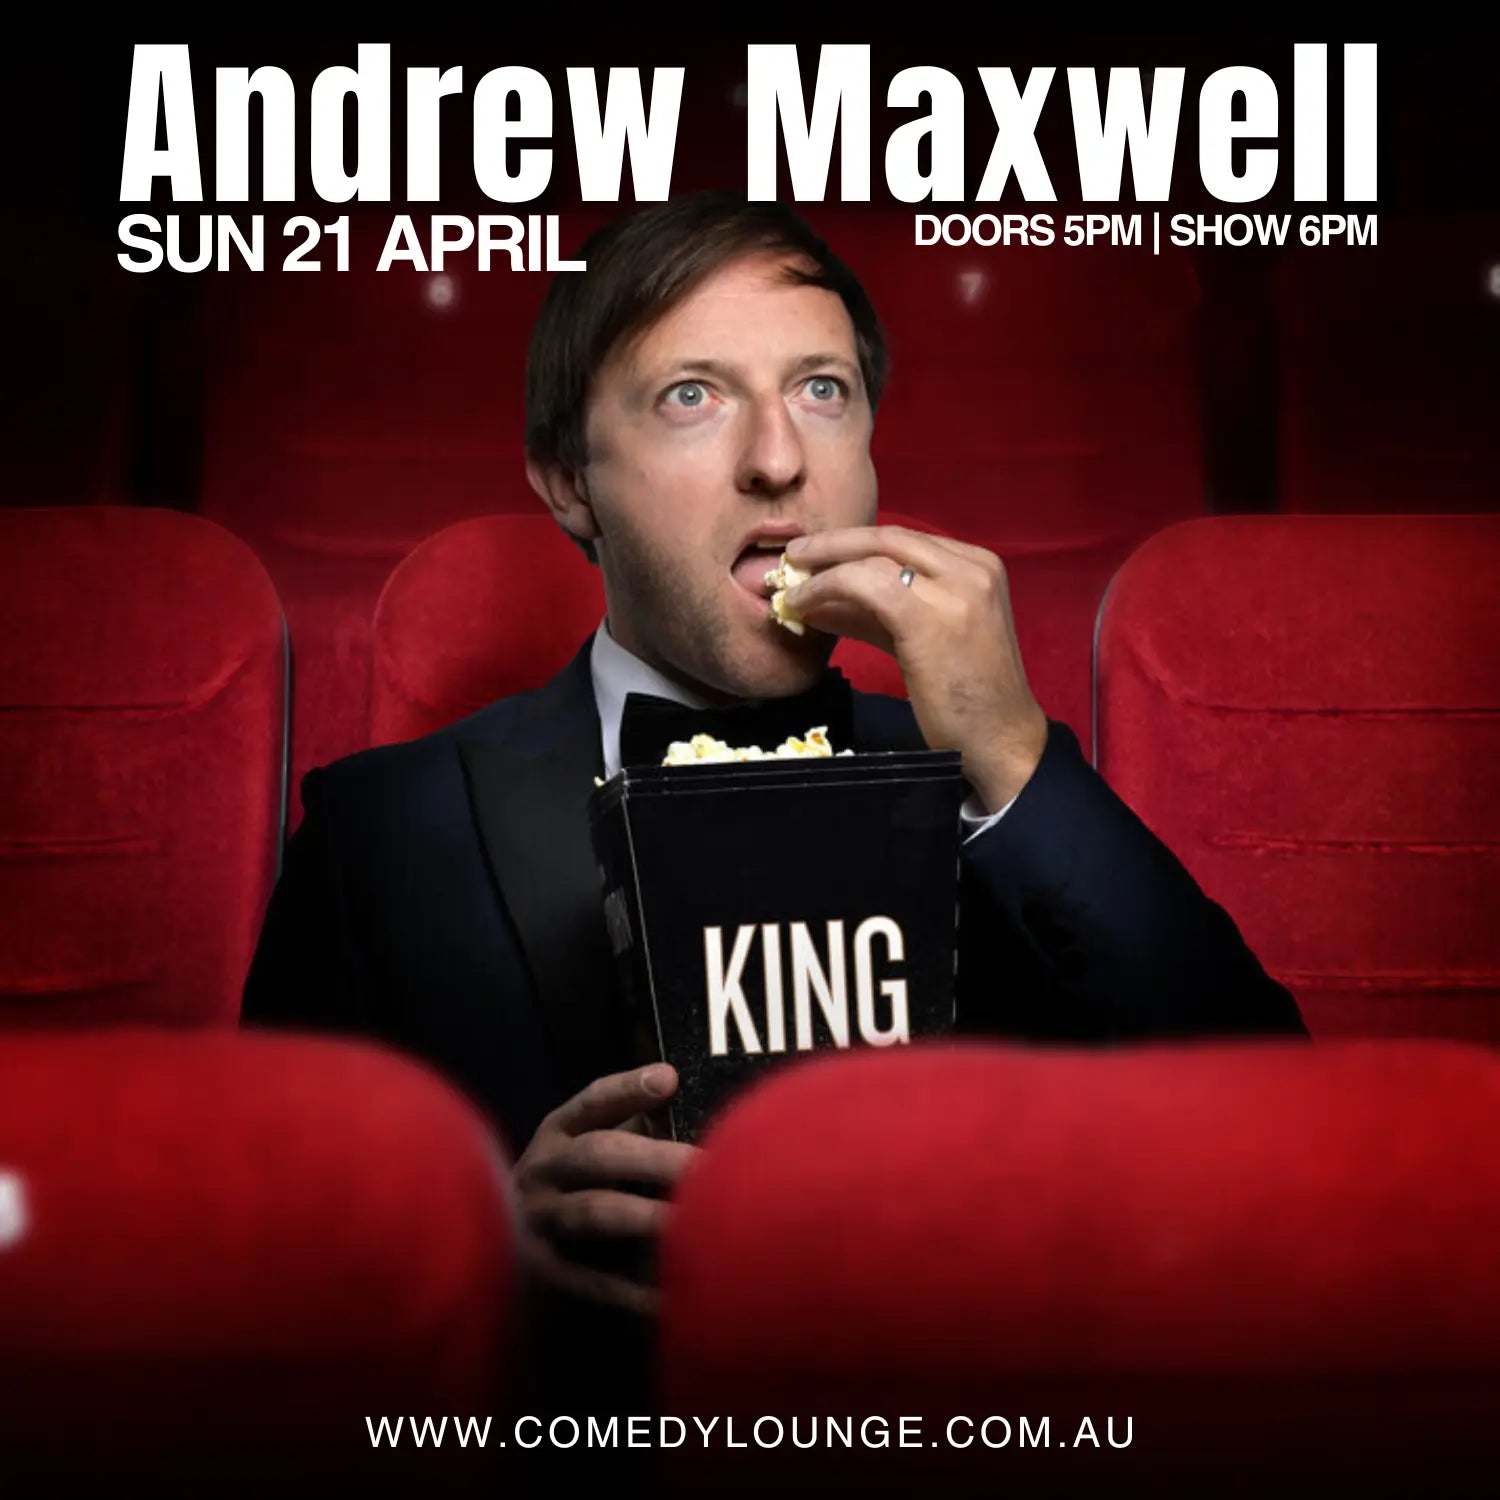 andrew maxwell performing live at Comedy Lounge in Perth Western Australia